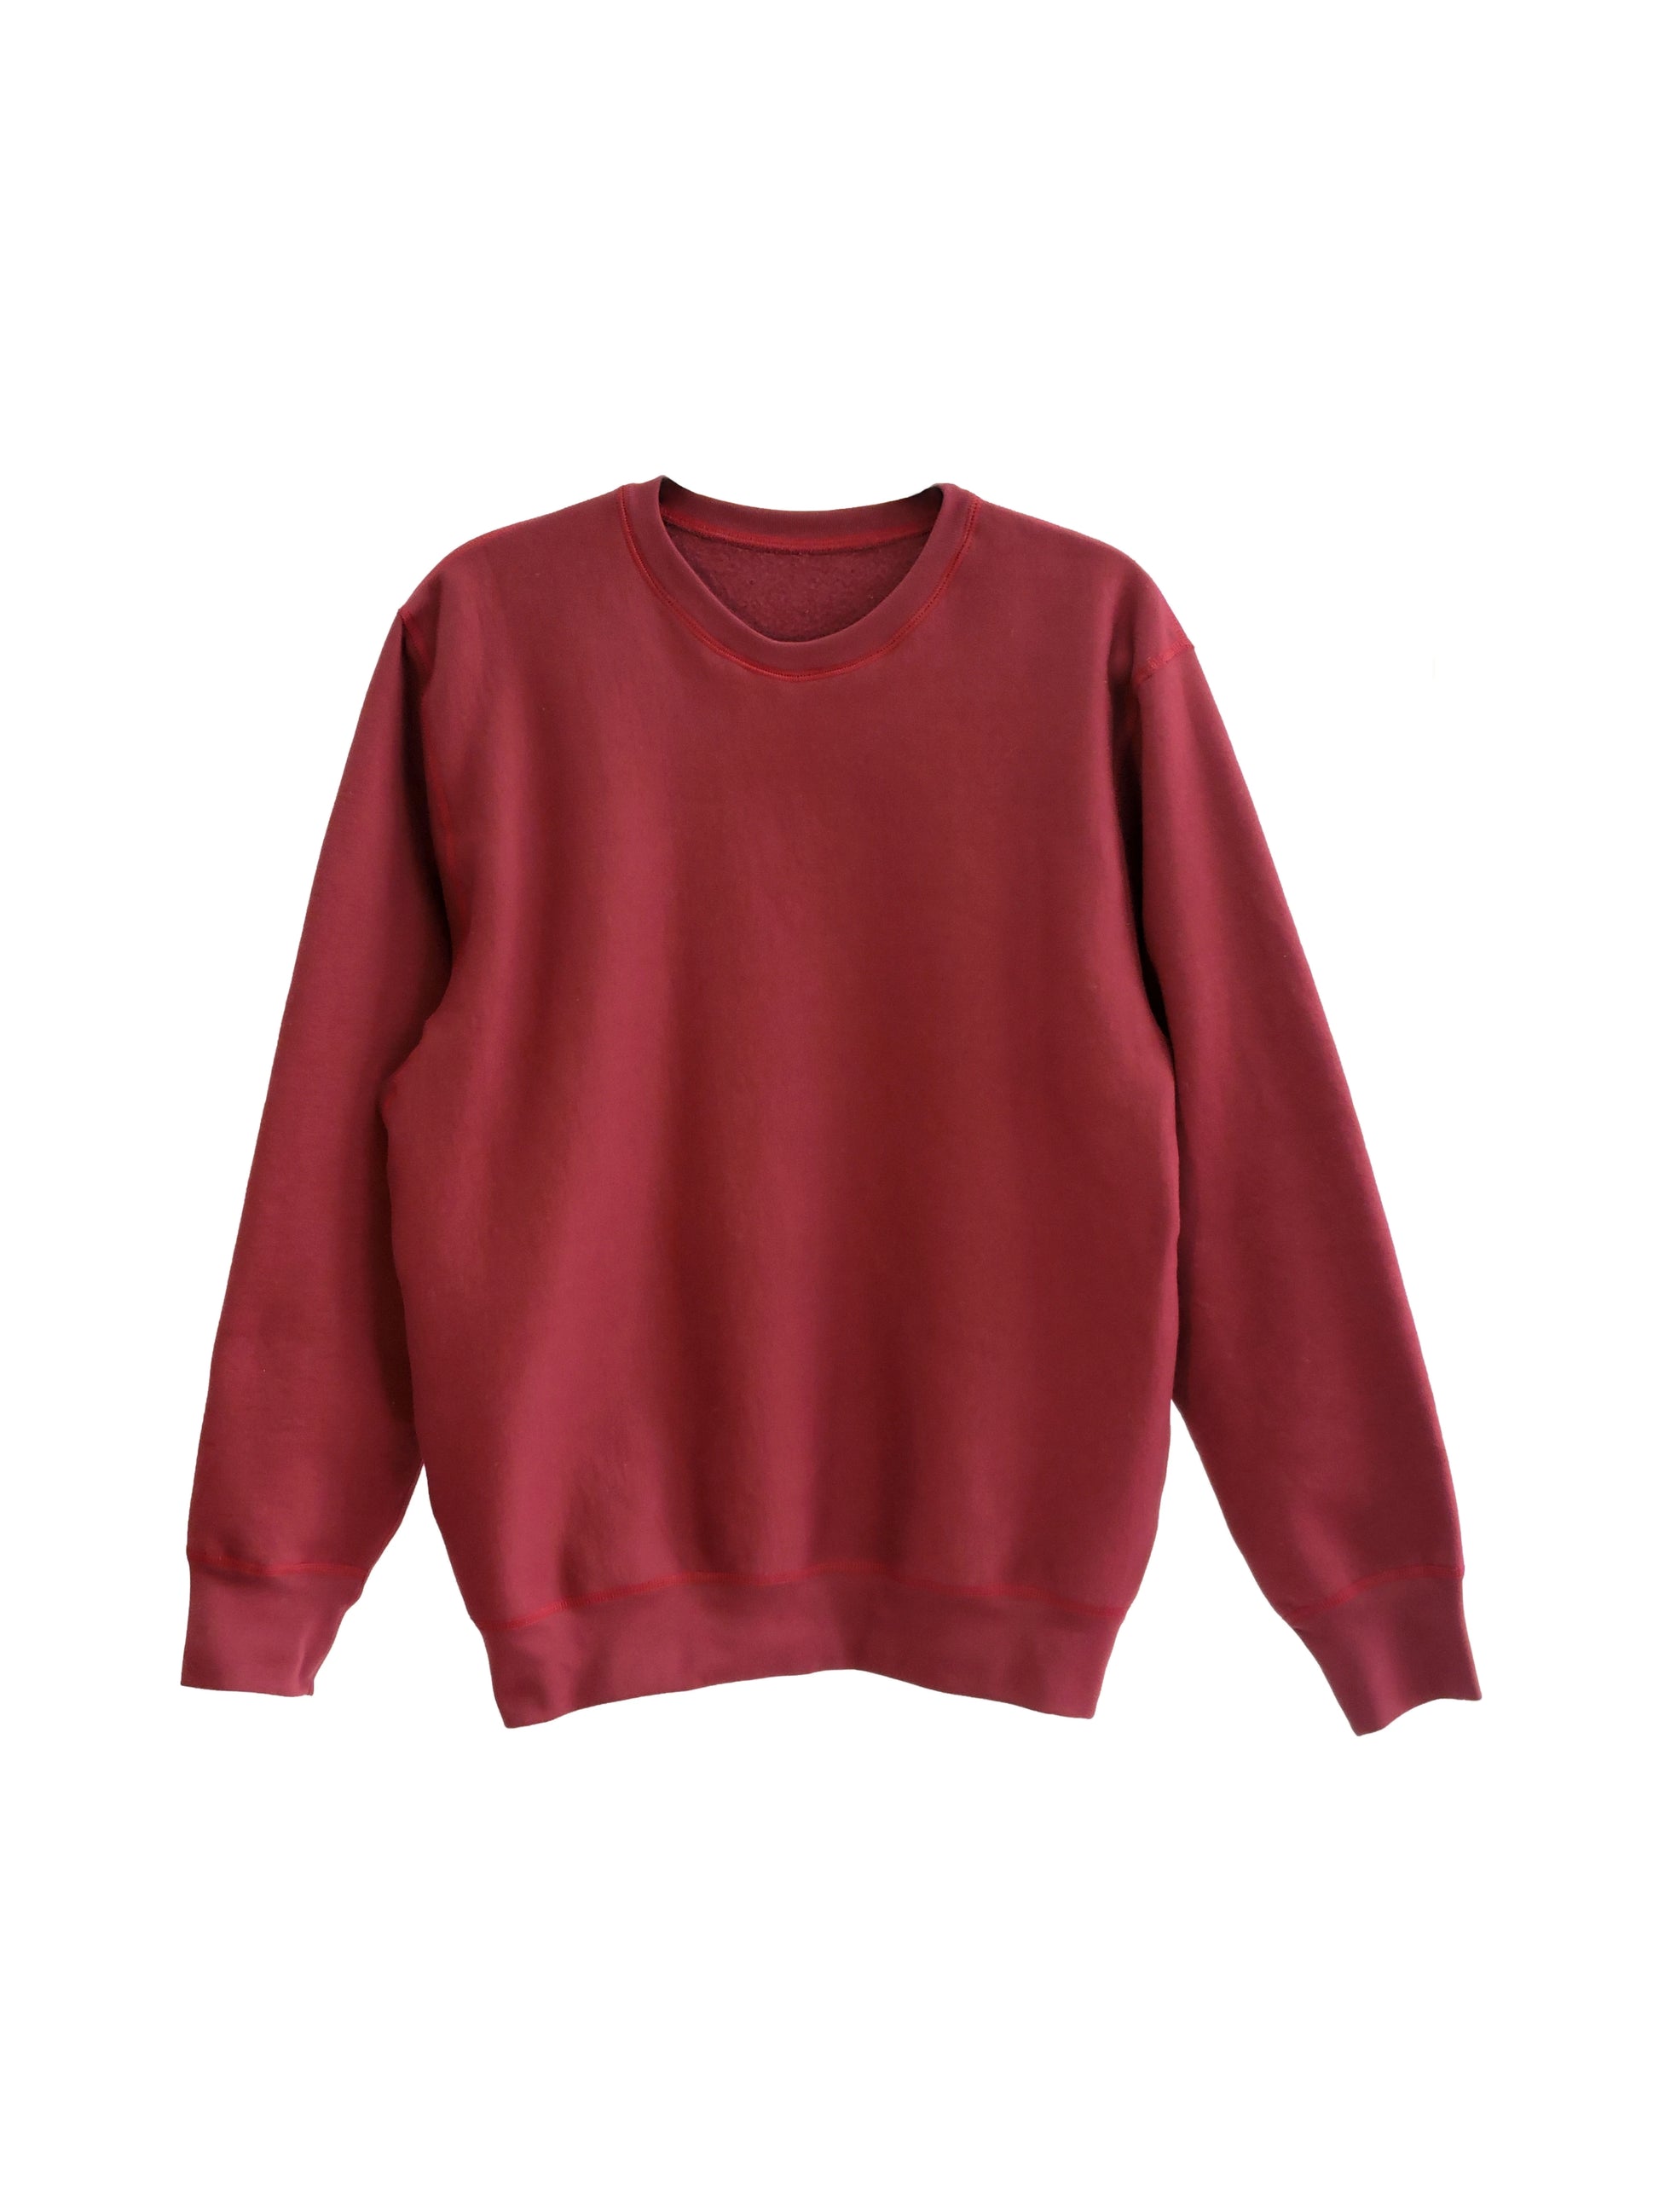 Knox Rose Color Block Maroon Burgundy Pullover Sweater Size L - 40% off